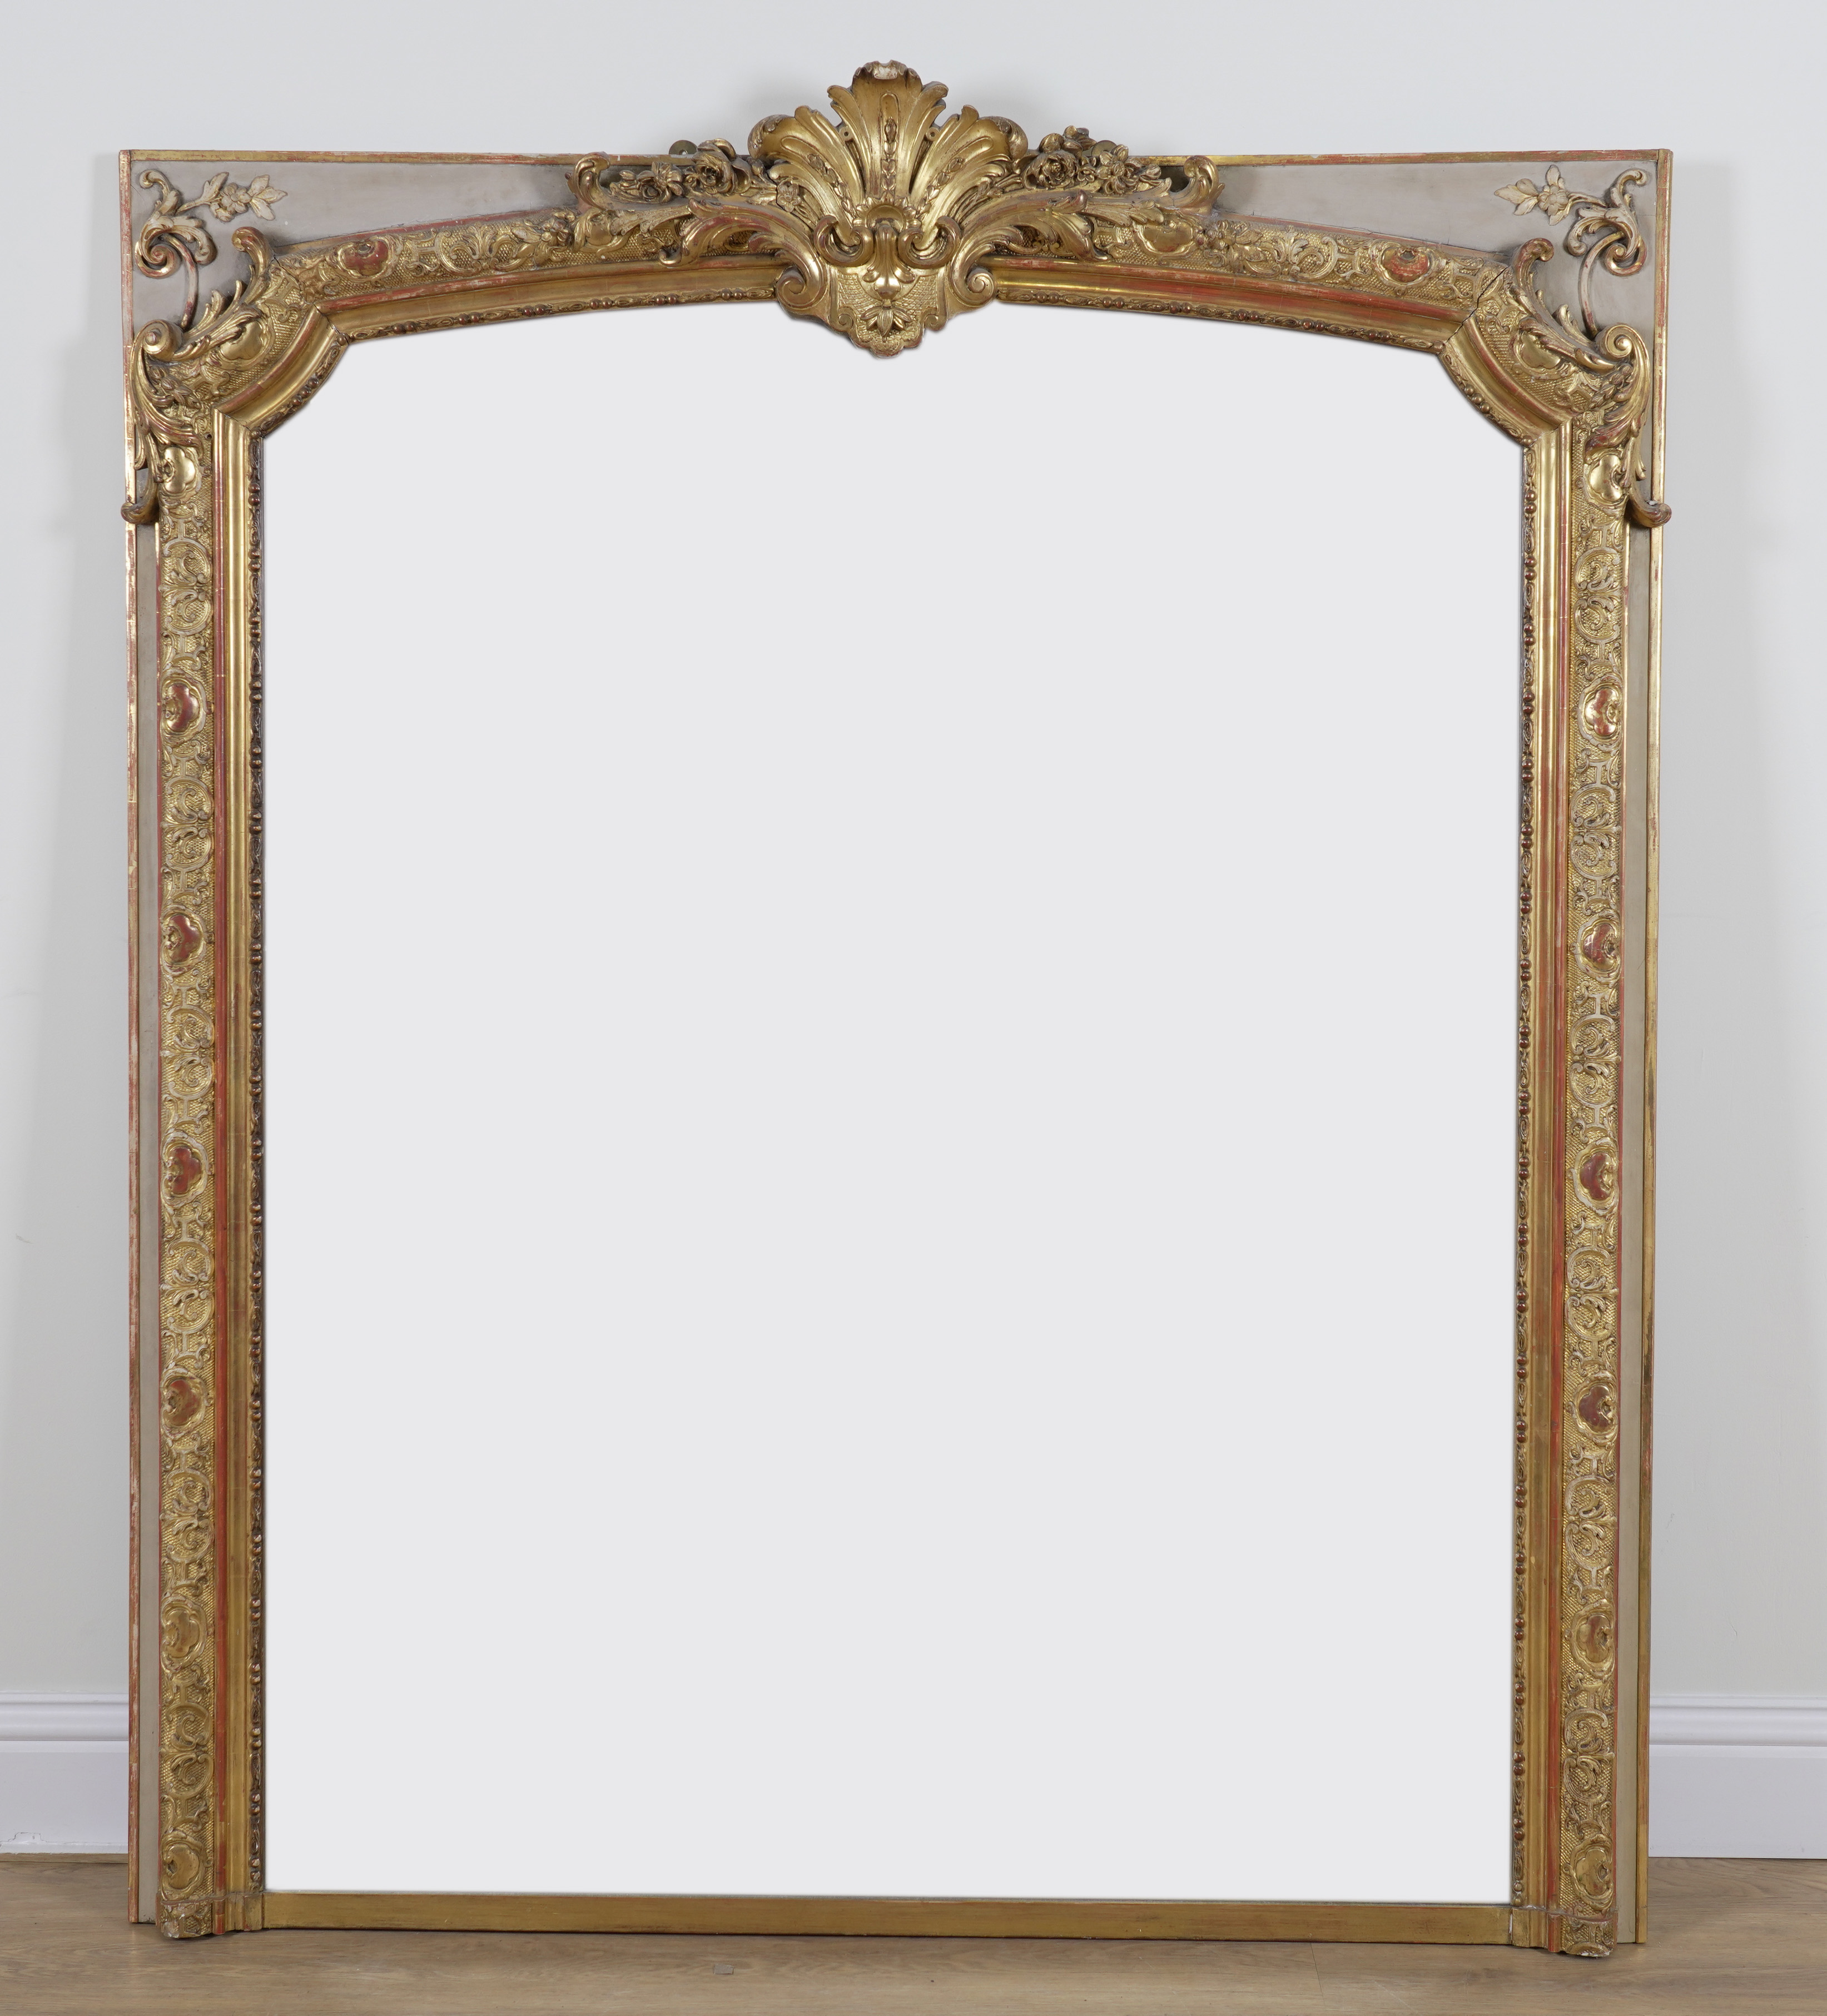 A 19TH CENTURY FRENCH CREAM PAINTED PARCEL GILT FRAMED OVERMANTEL MIRROR